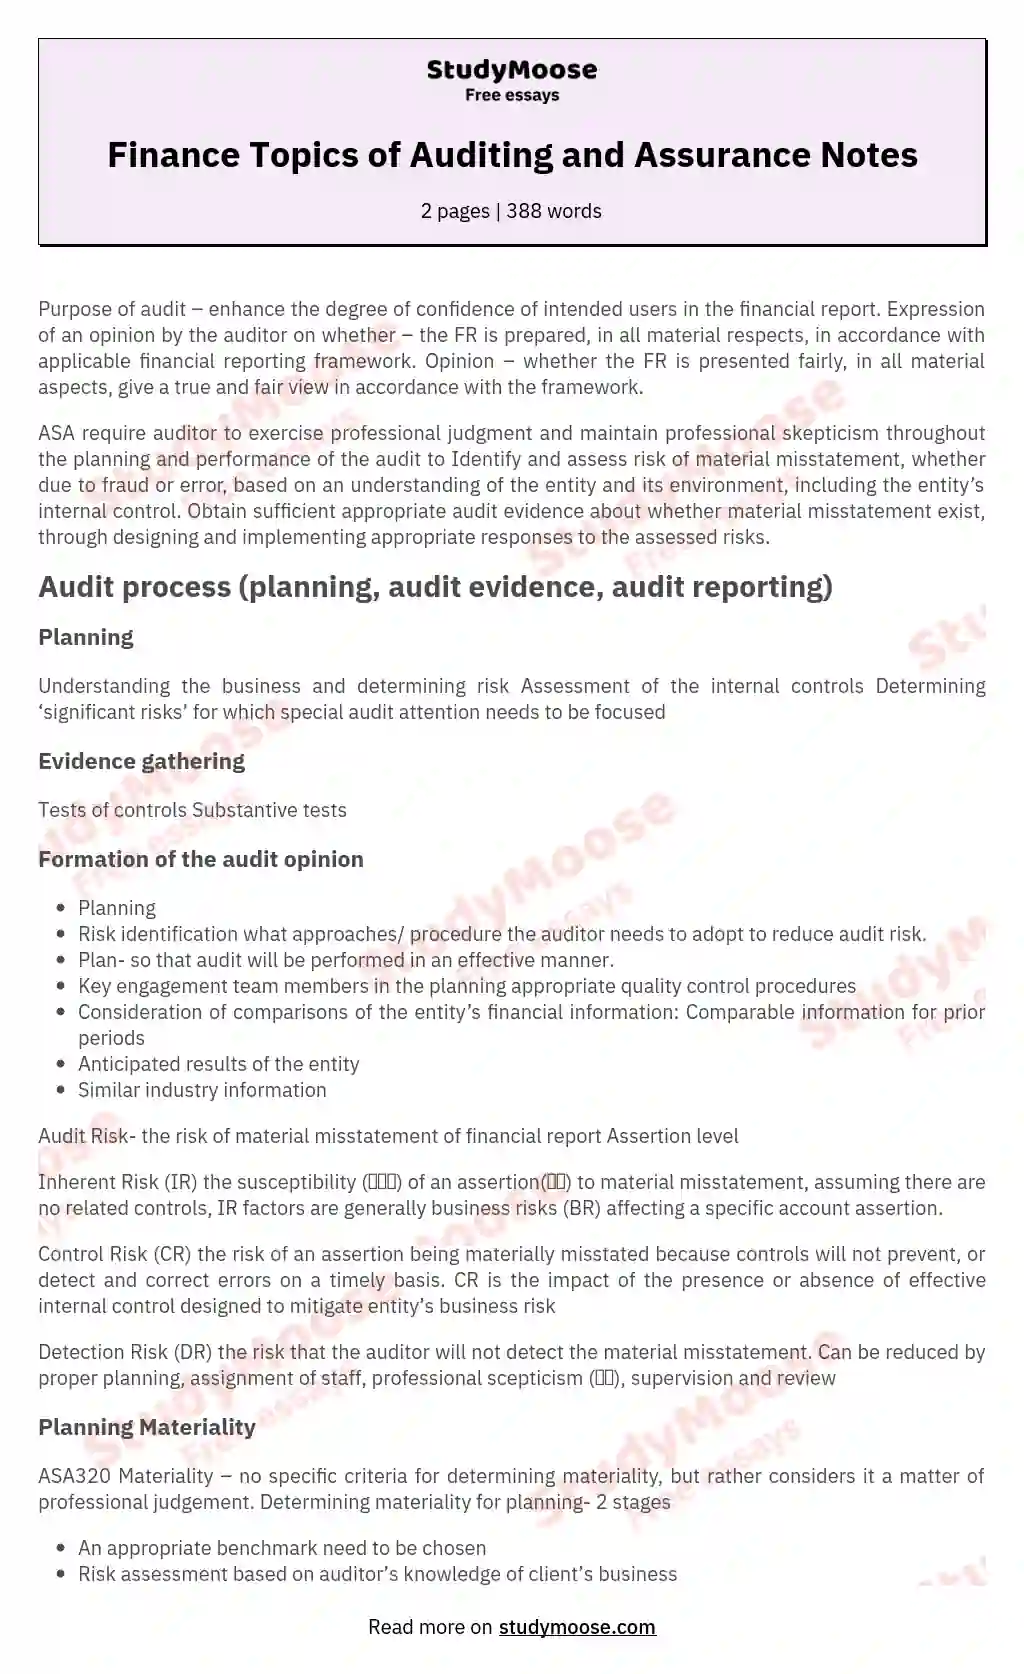 Finance Topics of Auditing and Assurance Notes essay